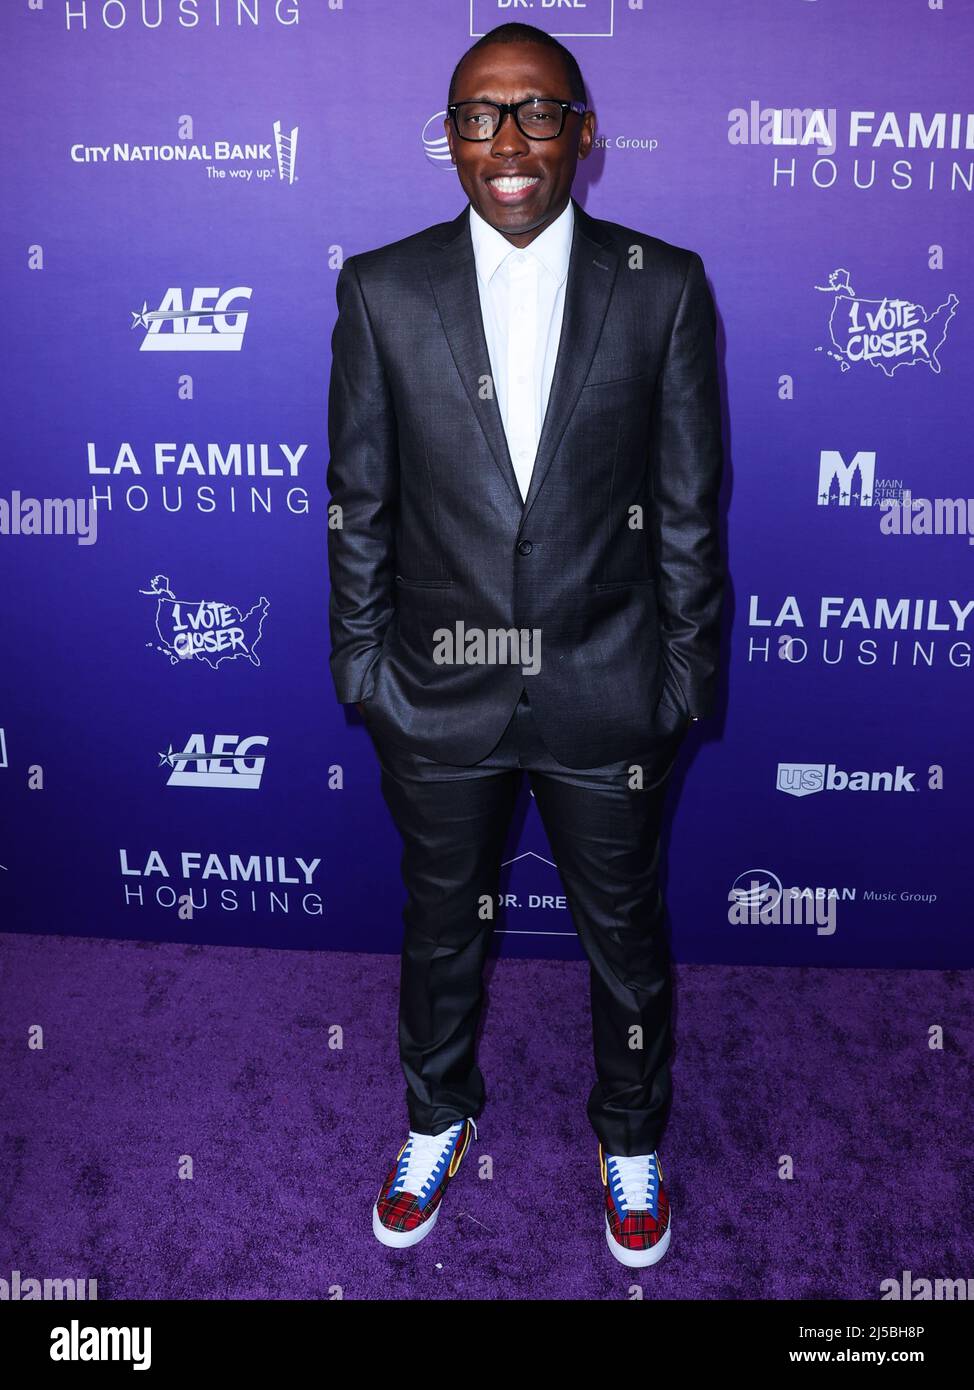 Hollywood, USA. 21st Apr, 2022. WEST HOLLYWOOD, LOS ANGELES, CALIFORNIA, USA - APRIL 21: YouTuber Jacques Slade arrives at the LA Family Housing (LAFH) Awards 2022 held at the Pacific Design Center on April 21, 2022 in West Hollywood, Los Angeles, California, United States. (Photo by Xavier Collin/Image Press Agency) Credit: Image Press Agency/Alamy Live News Stock Photo